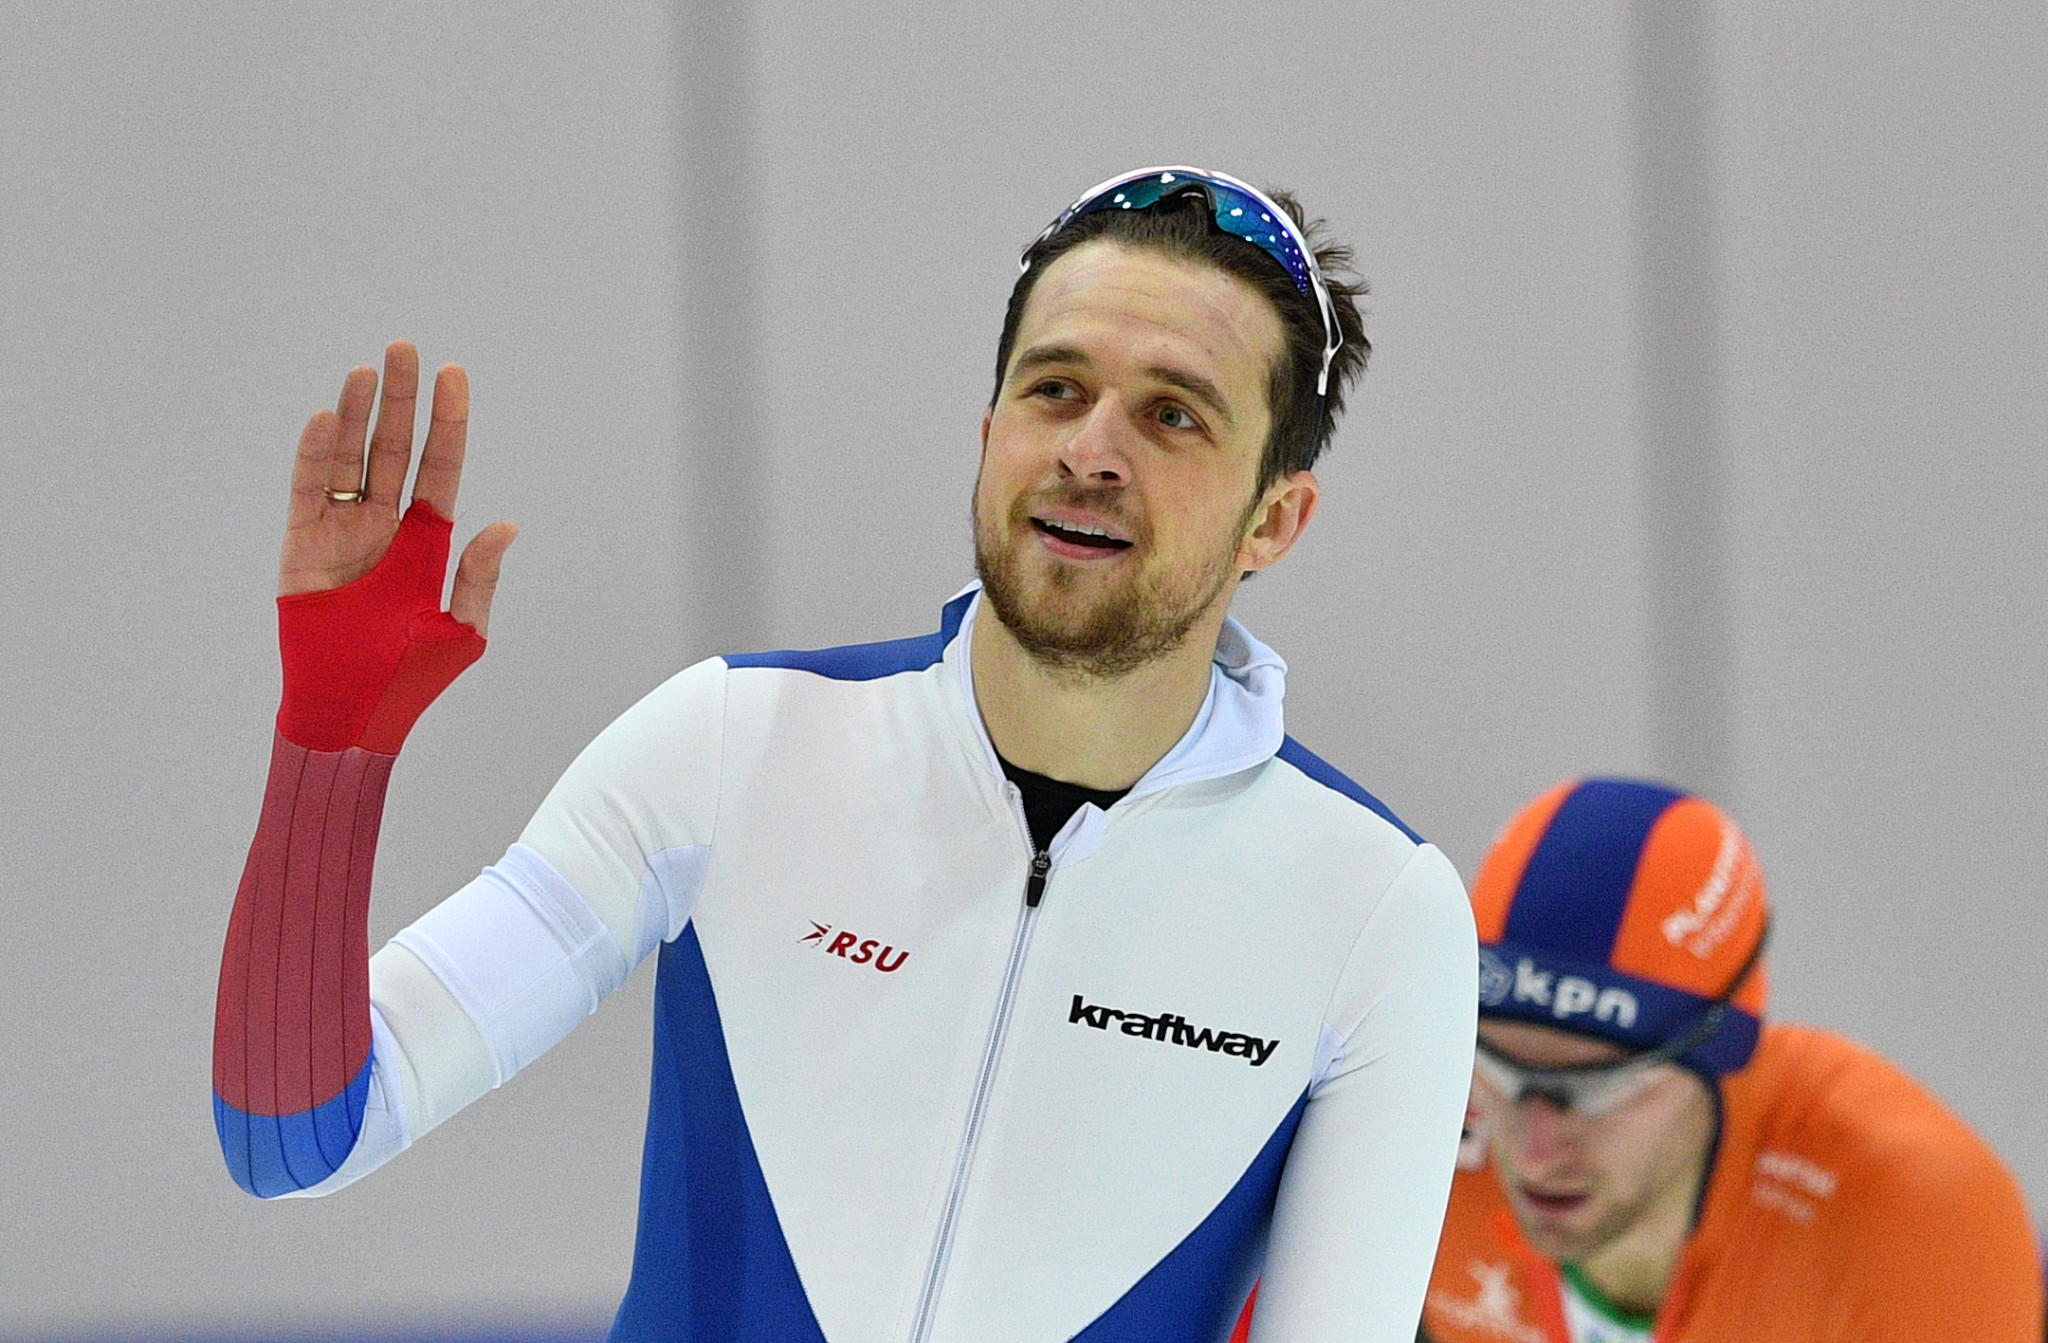 Denis Yuskov has also seemingly been ruled out of competing at Pyeongchang 2018 ©Getty Images